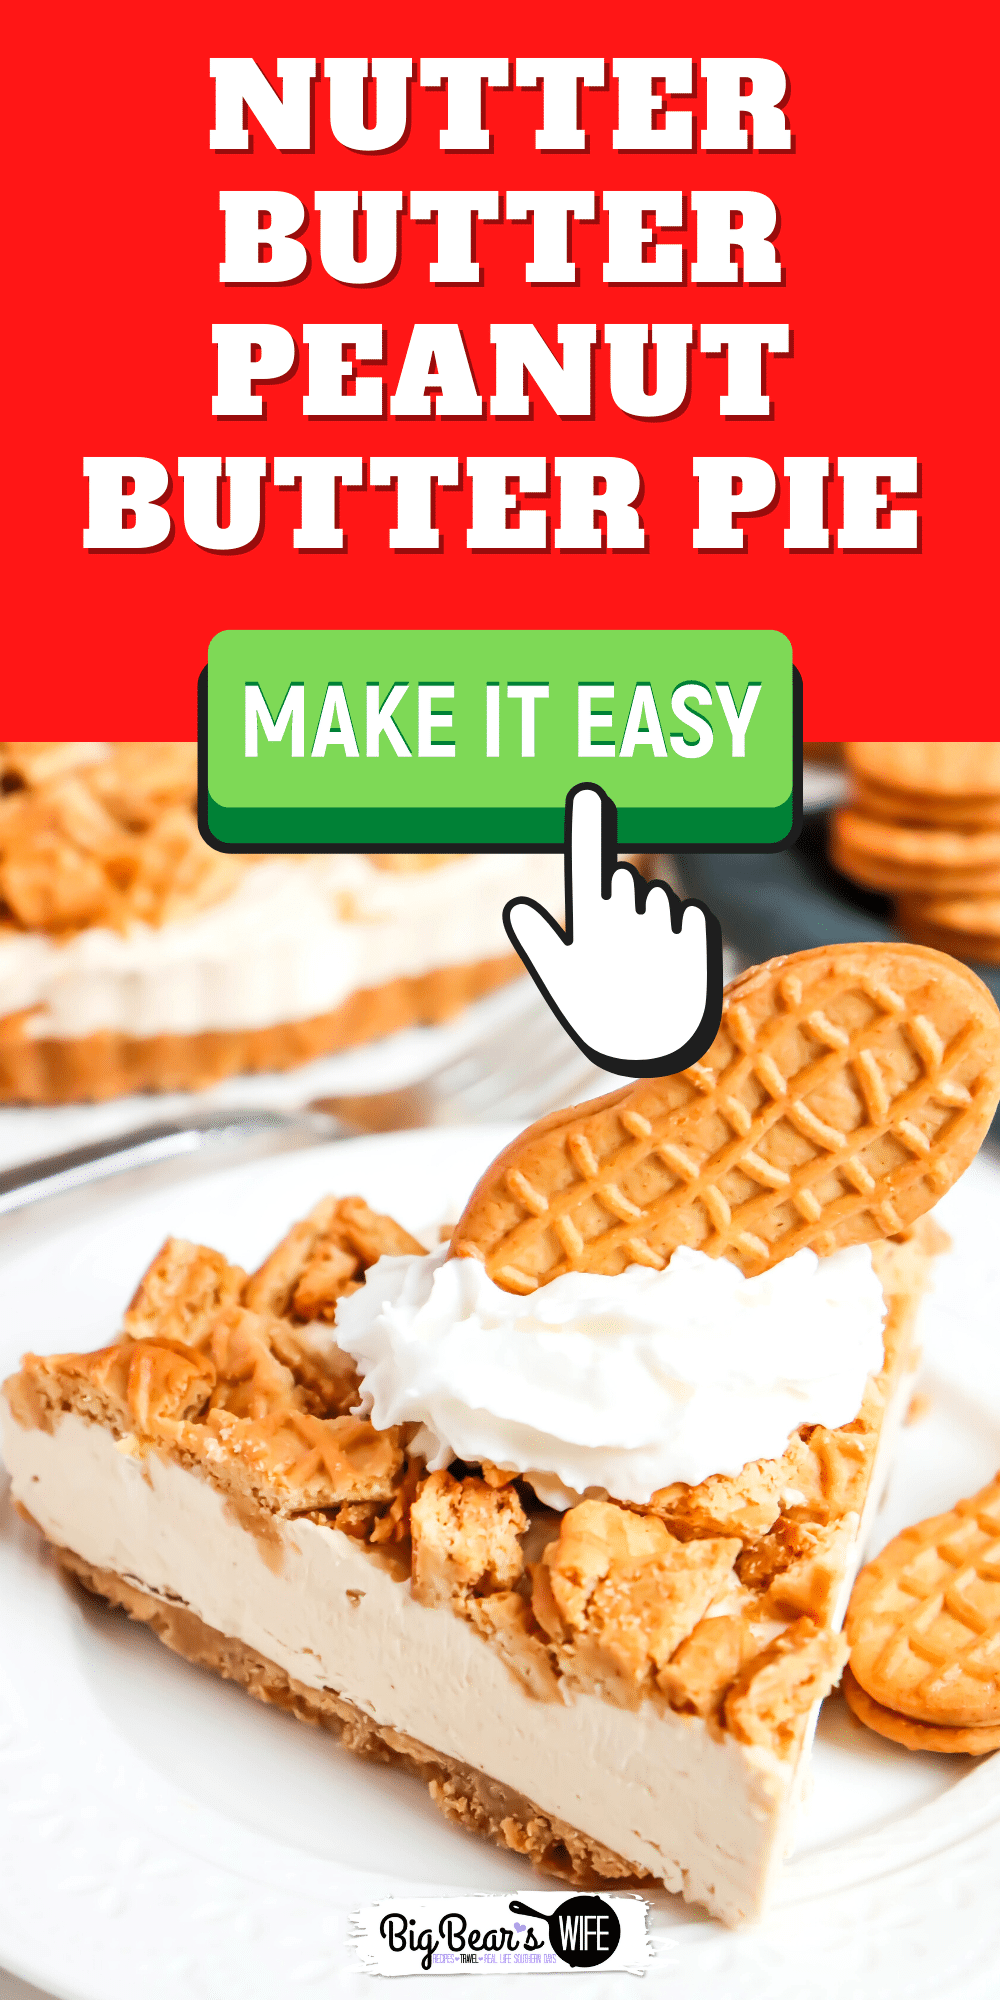 This pie is what peanut butter lovers dream about! Homemade Nutter Butter Peanut Butter pie is packed with peanut butter and has a Nutter Butter crust and topping! via @bigbearswife